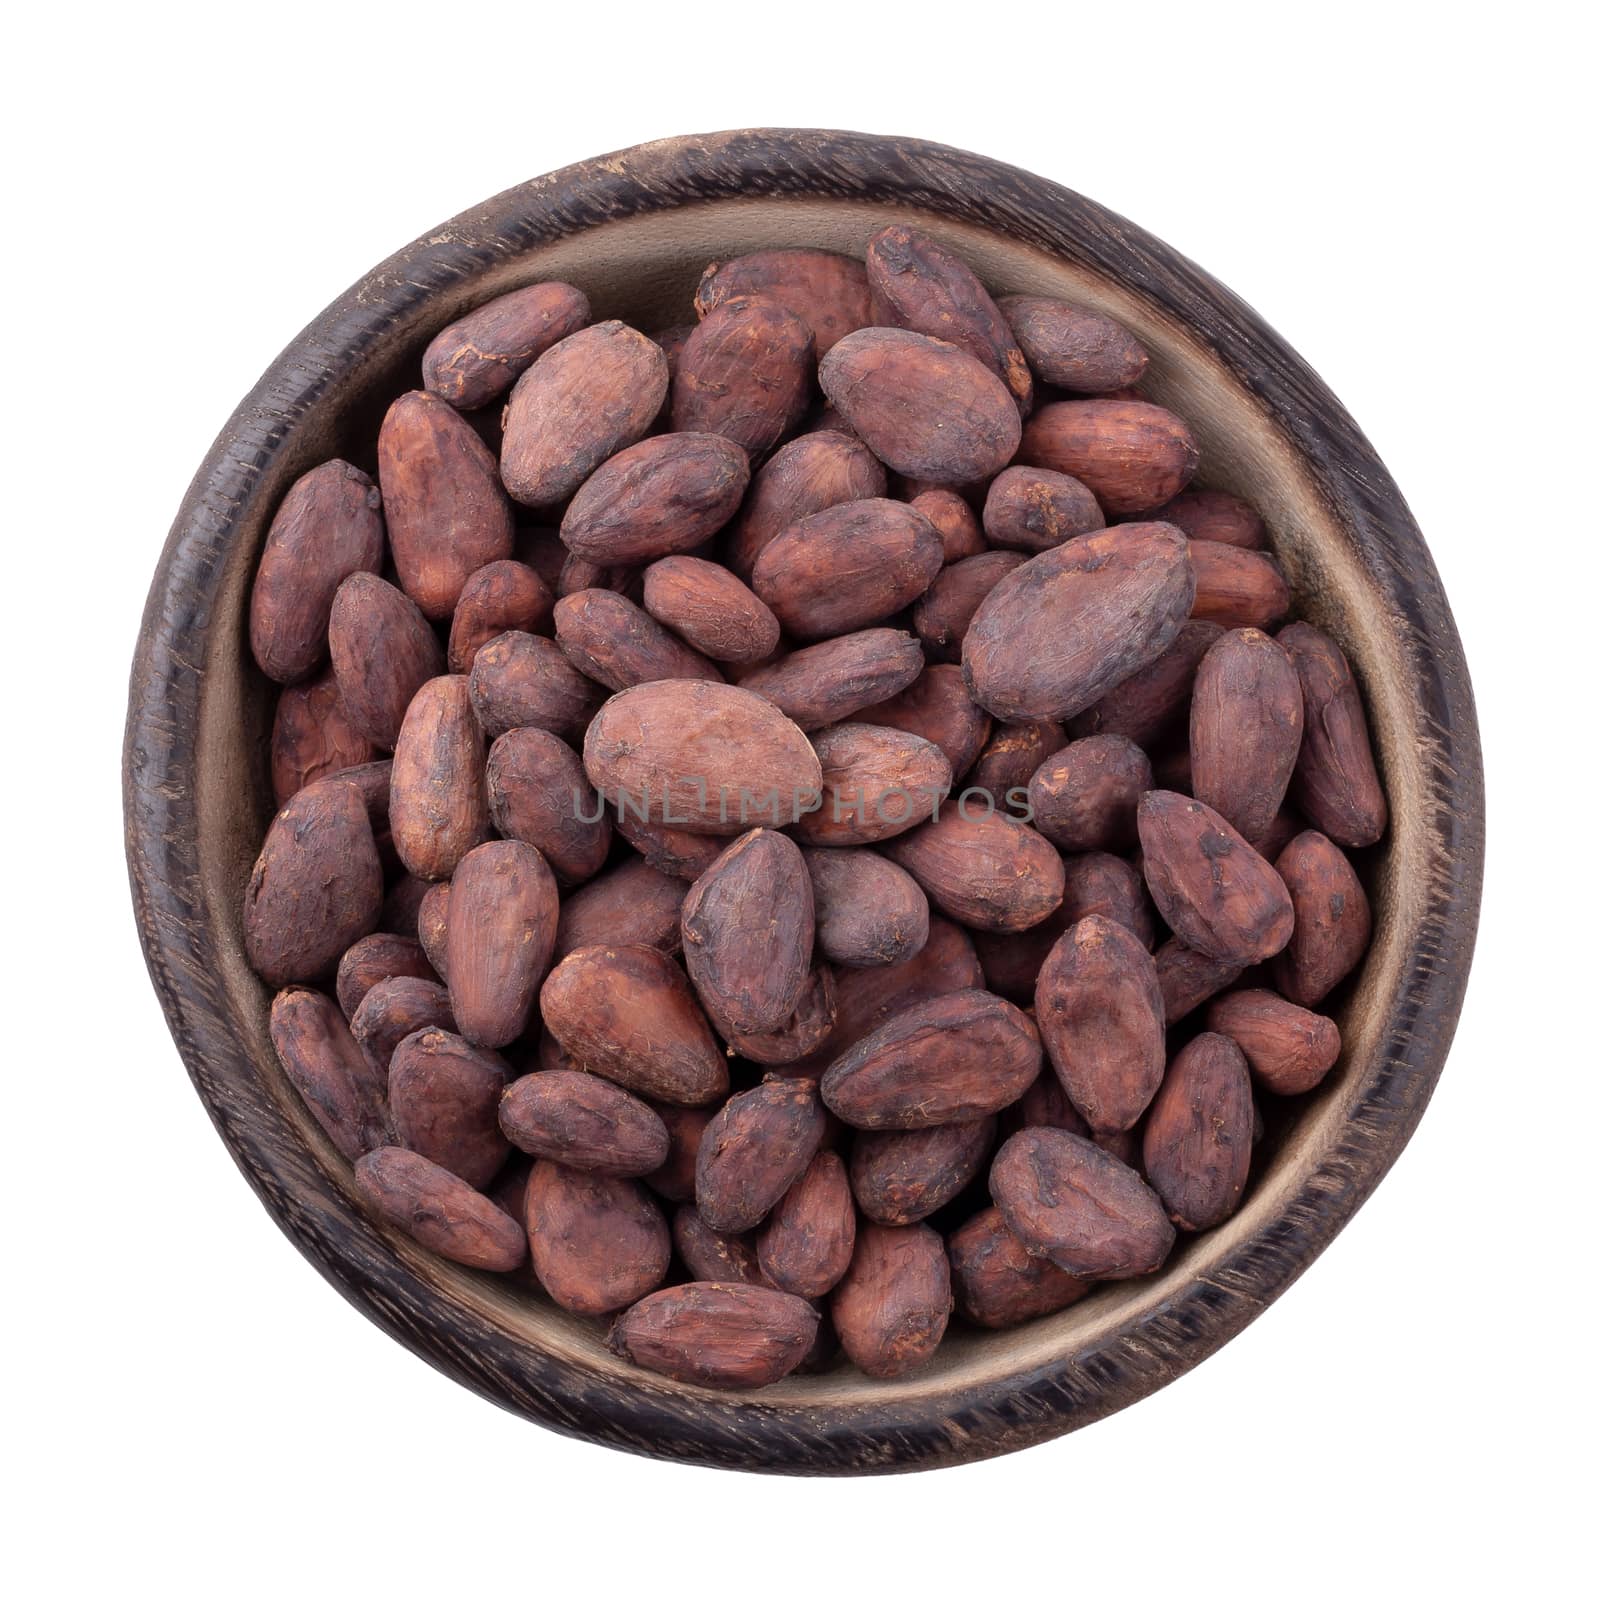 Cocoa fruit in a wooden bowl, raw cacao beans isolated on a whit by kaiskynet